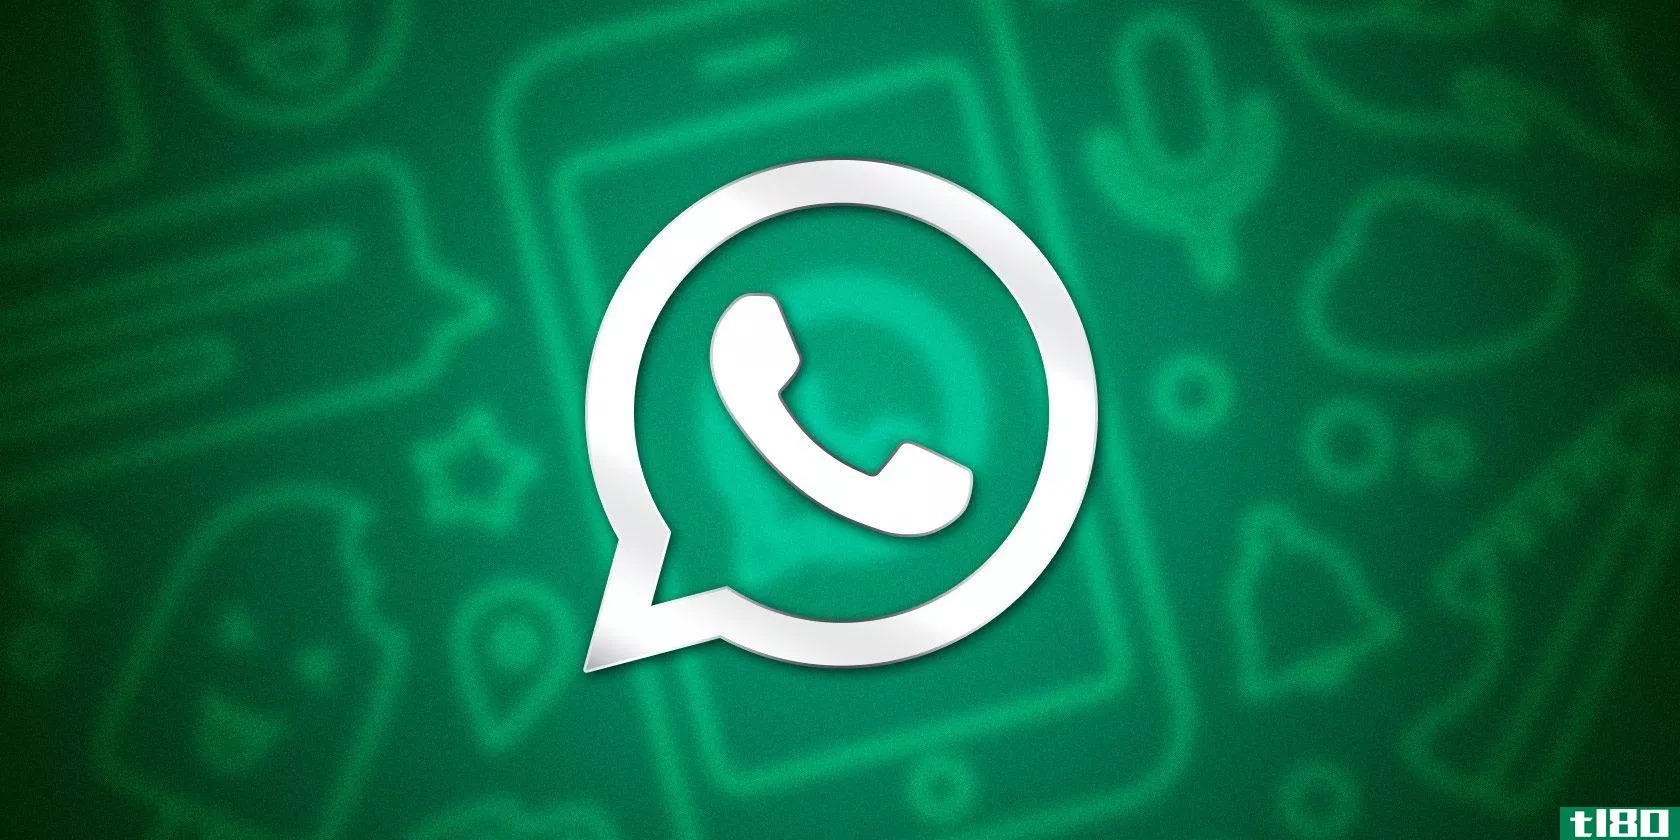 whatsapp-new-features